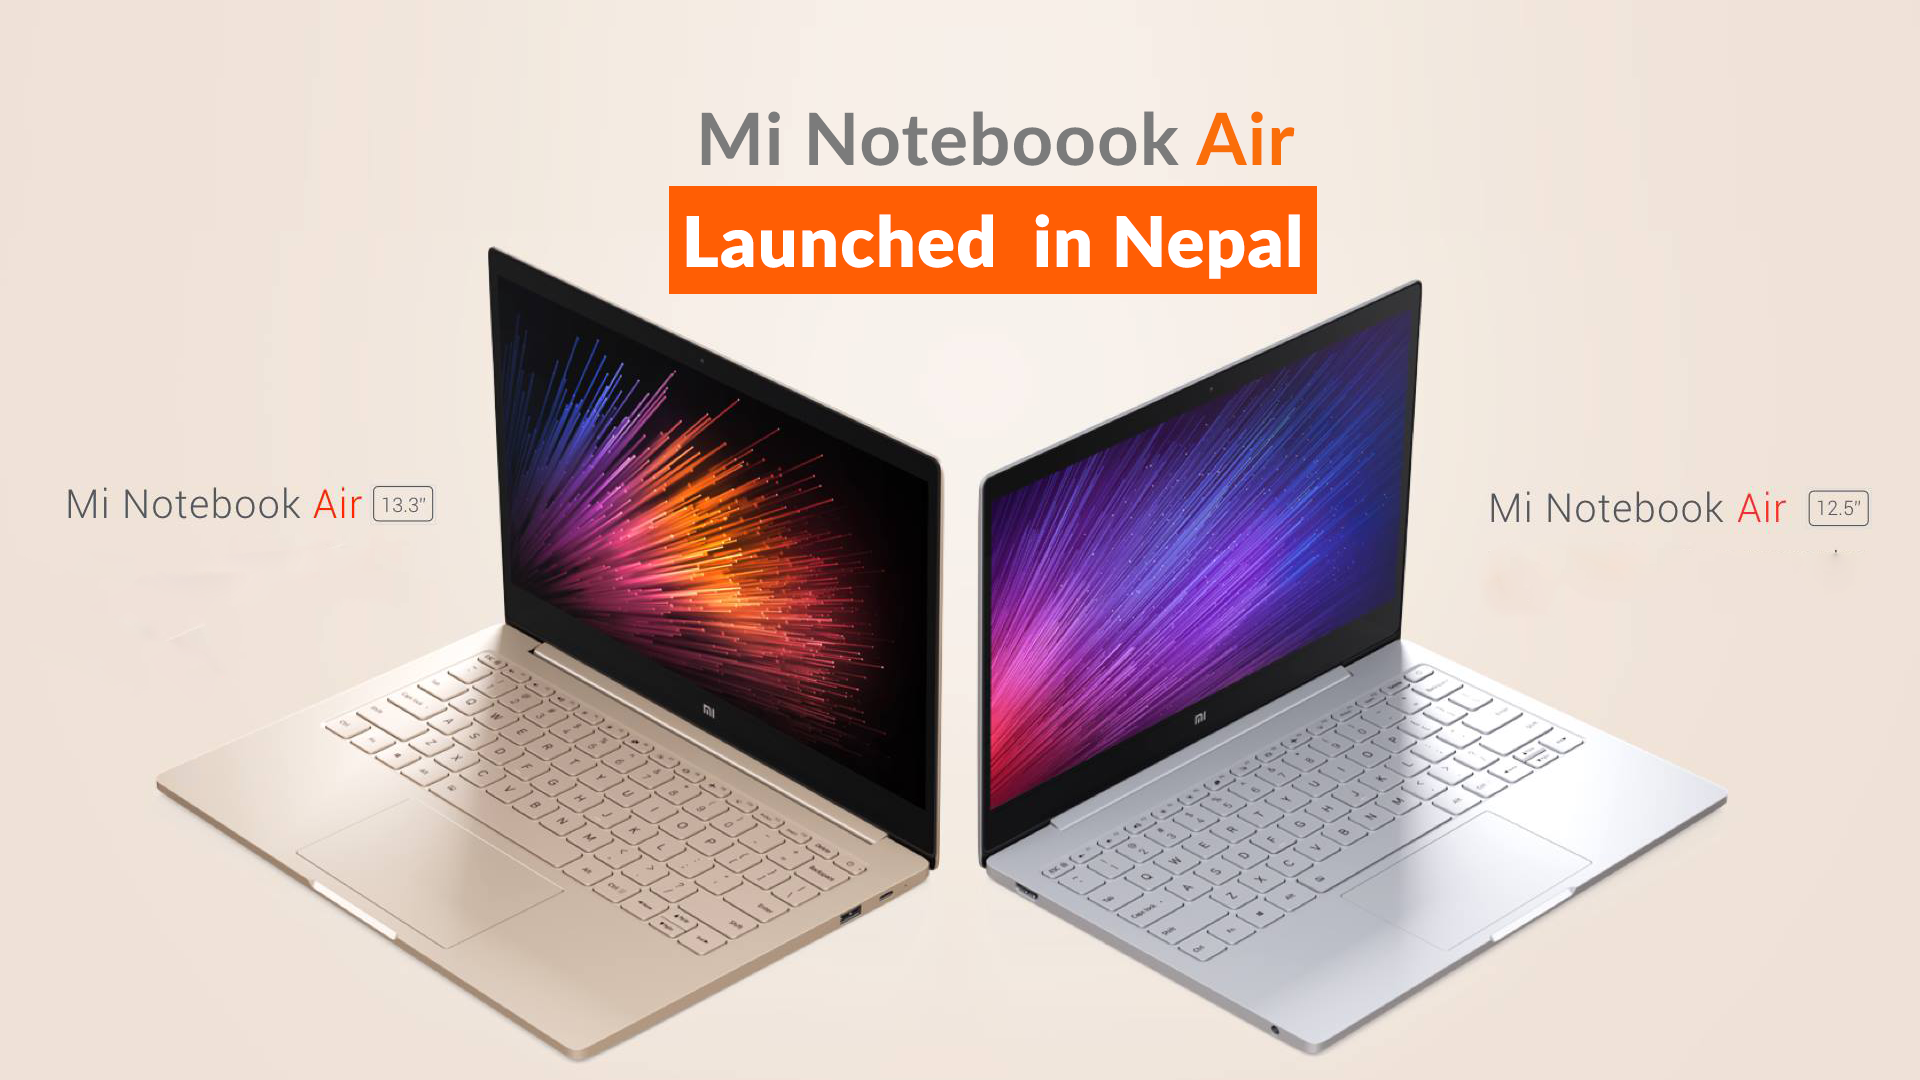 Xiaomi Notebook Air 13.3 and Xiaomi Notebook Air 12.5 Launched in Nepal